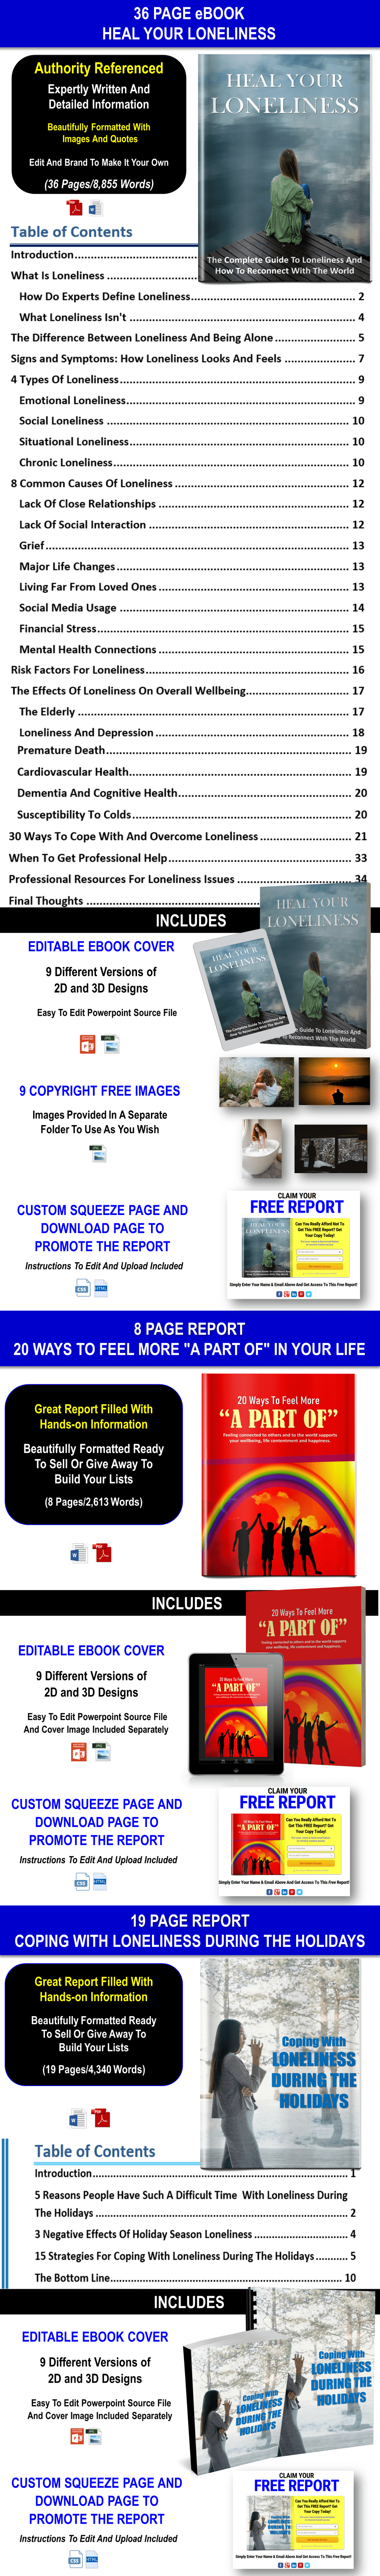 Heal Your Loneliness Giant PLR